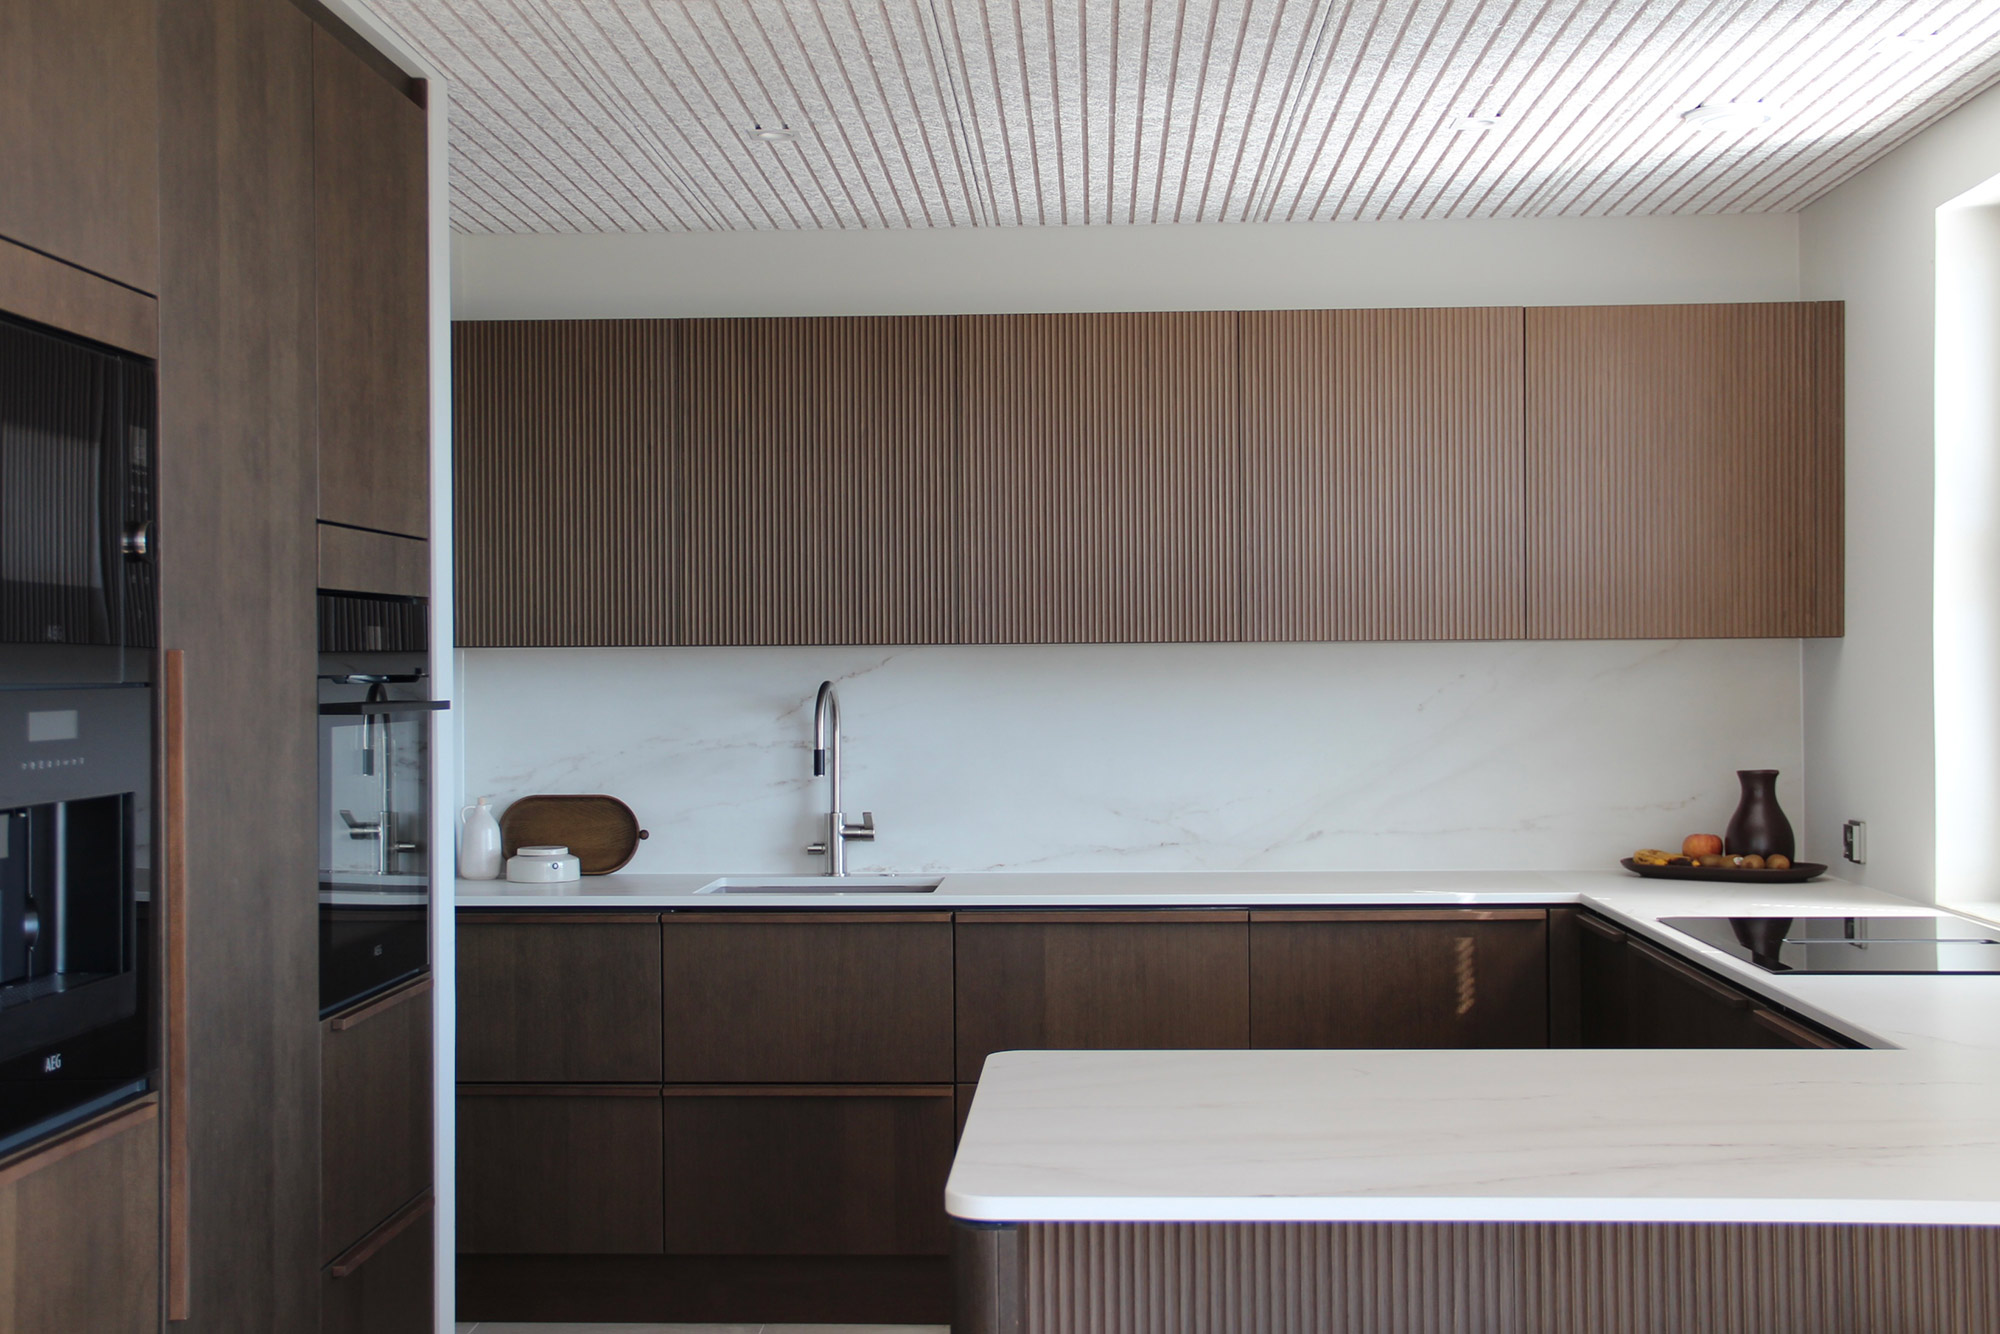 Image of Katja Suominen 1 1 in Kitchen renovation in a house build in period architecture of the 60’es - Cosentino